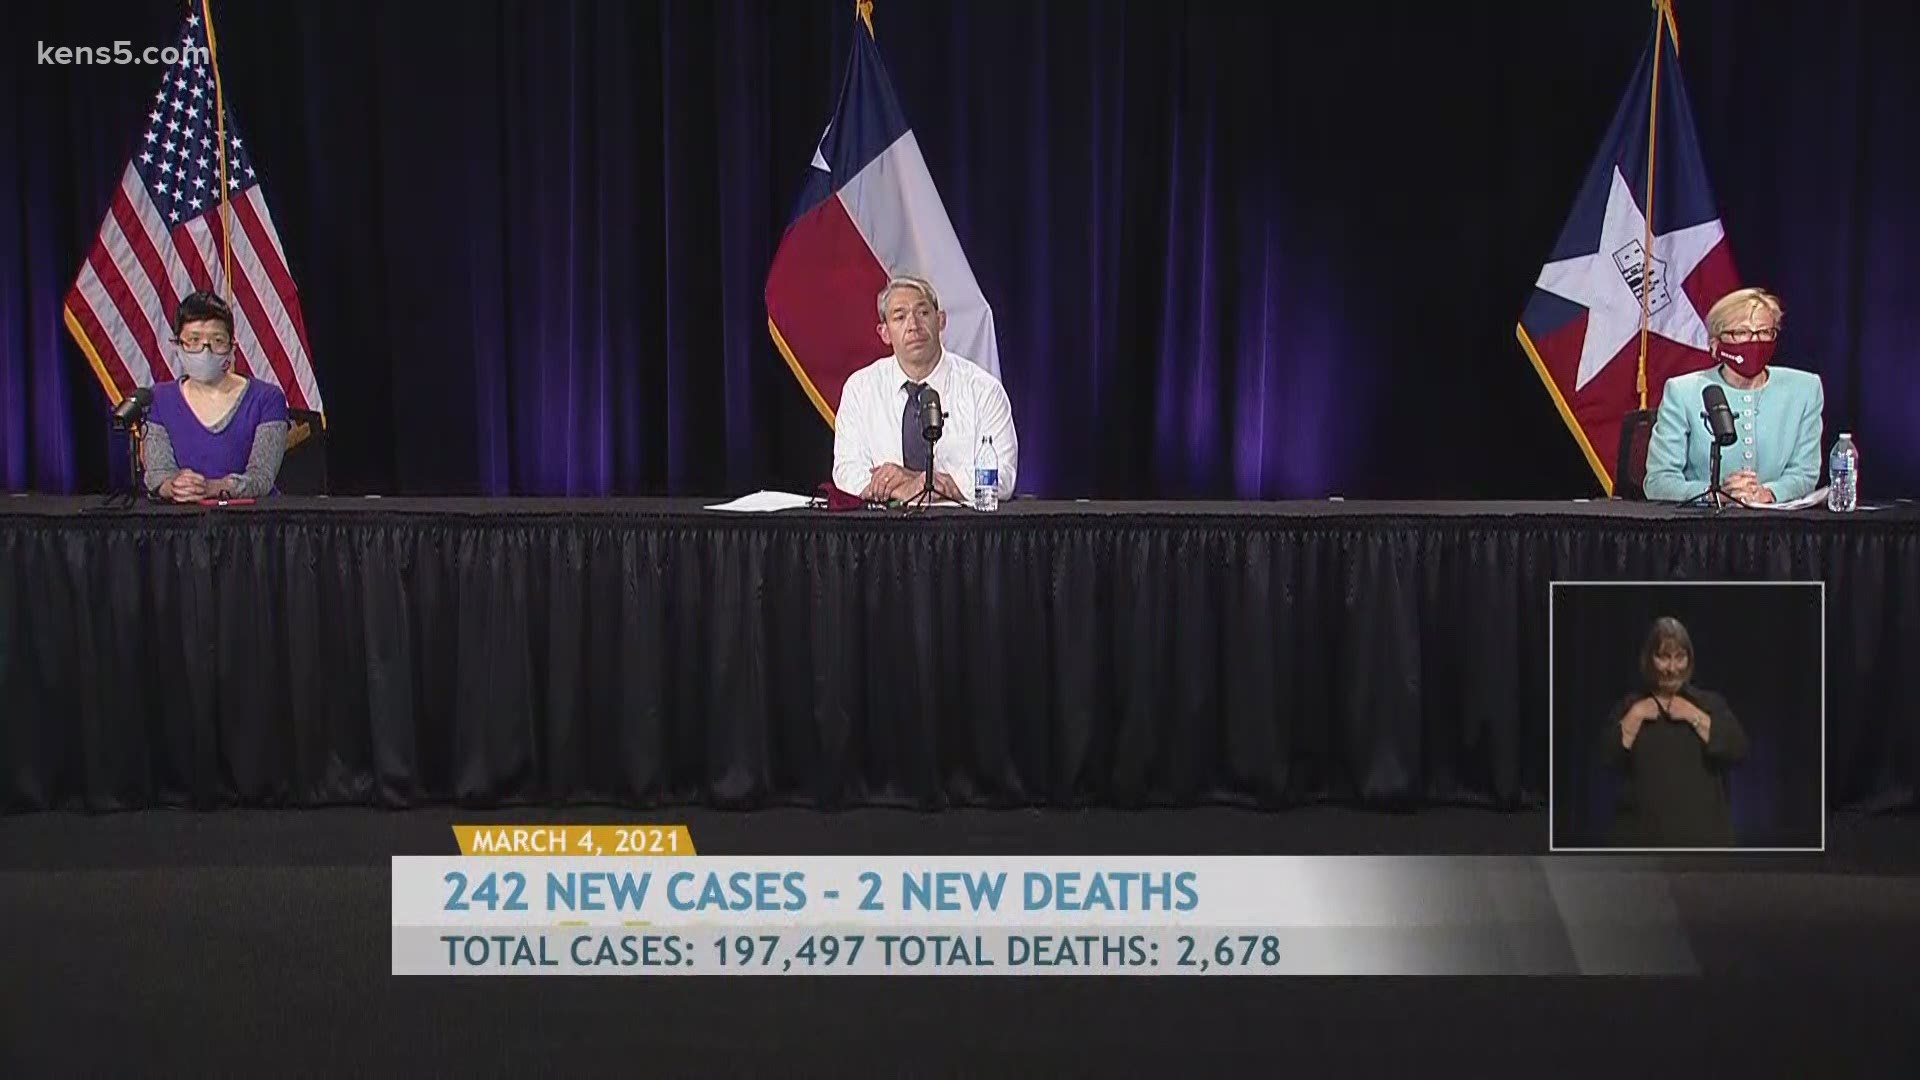 Mayor Nirenberg reported 242 new cases, bringing San Antonio's total to 197,497. Two new deaths were also reported, bringing the local death toll to 2,678.